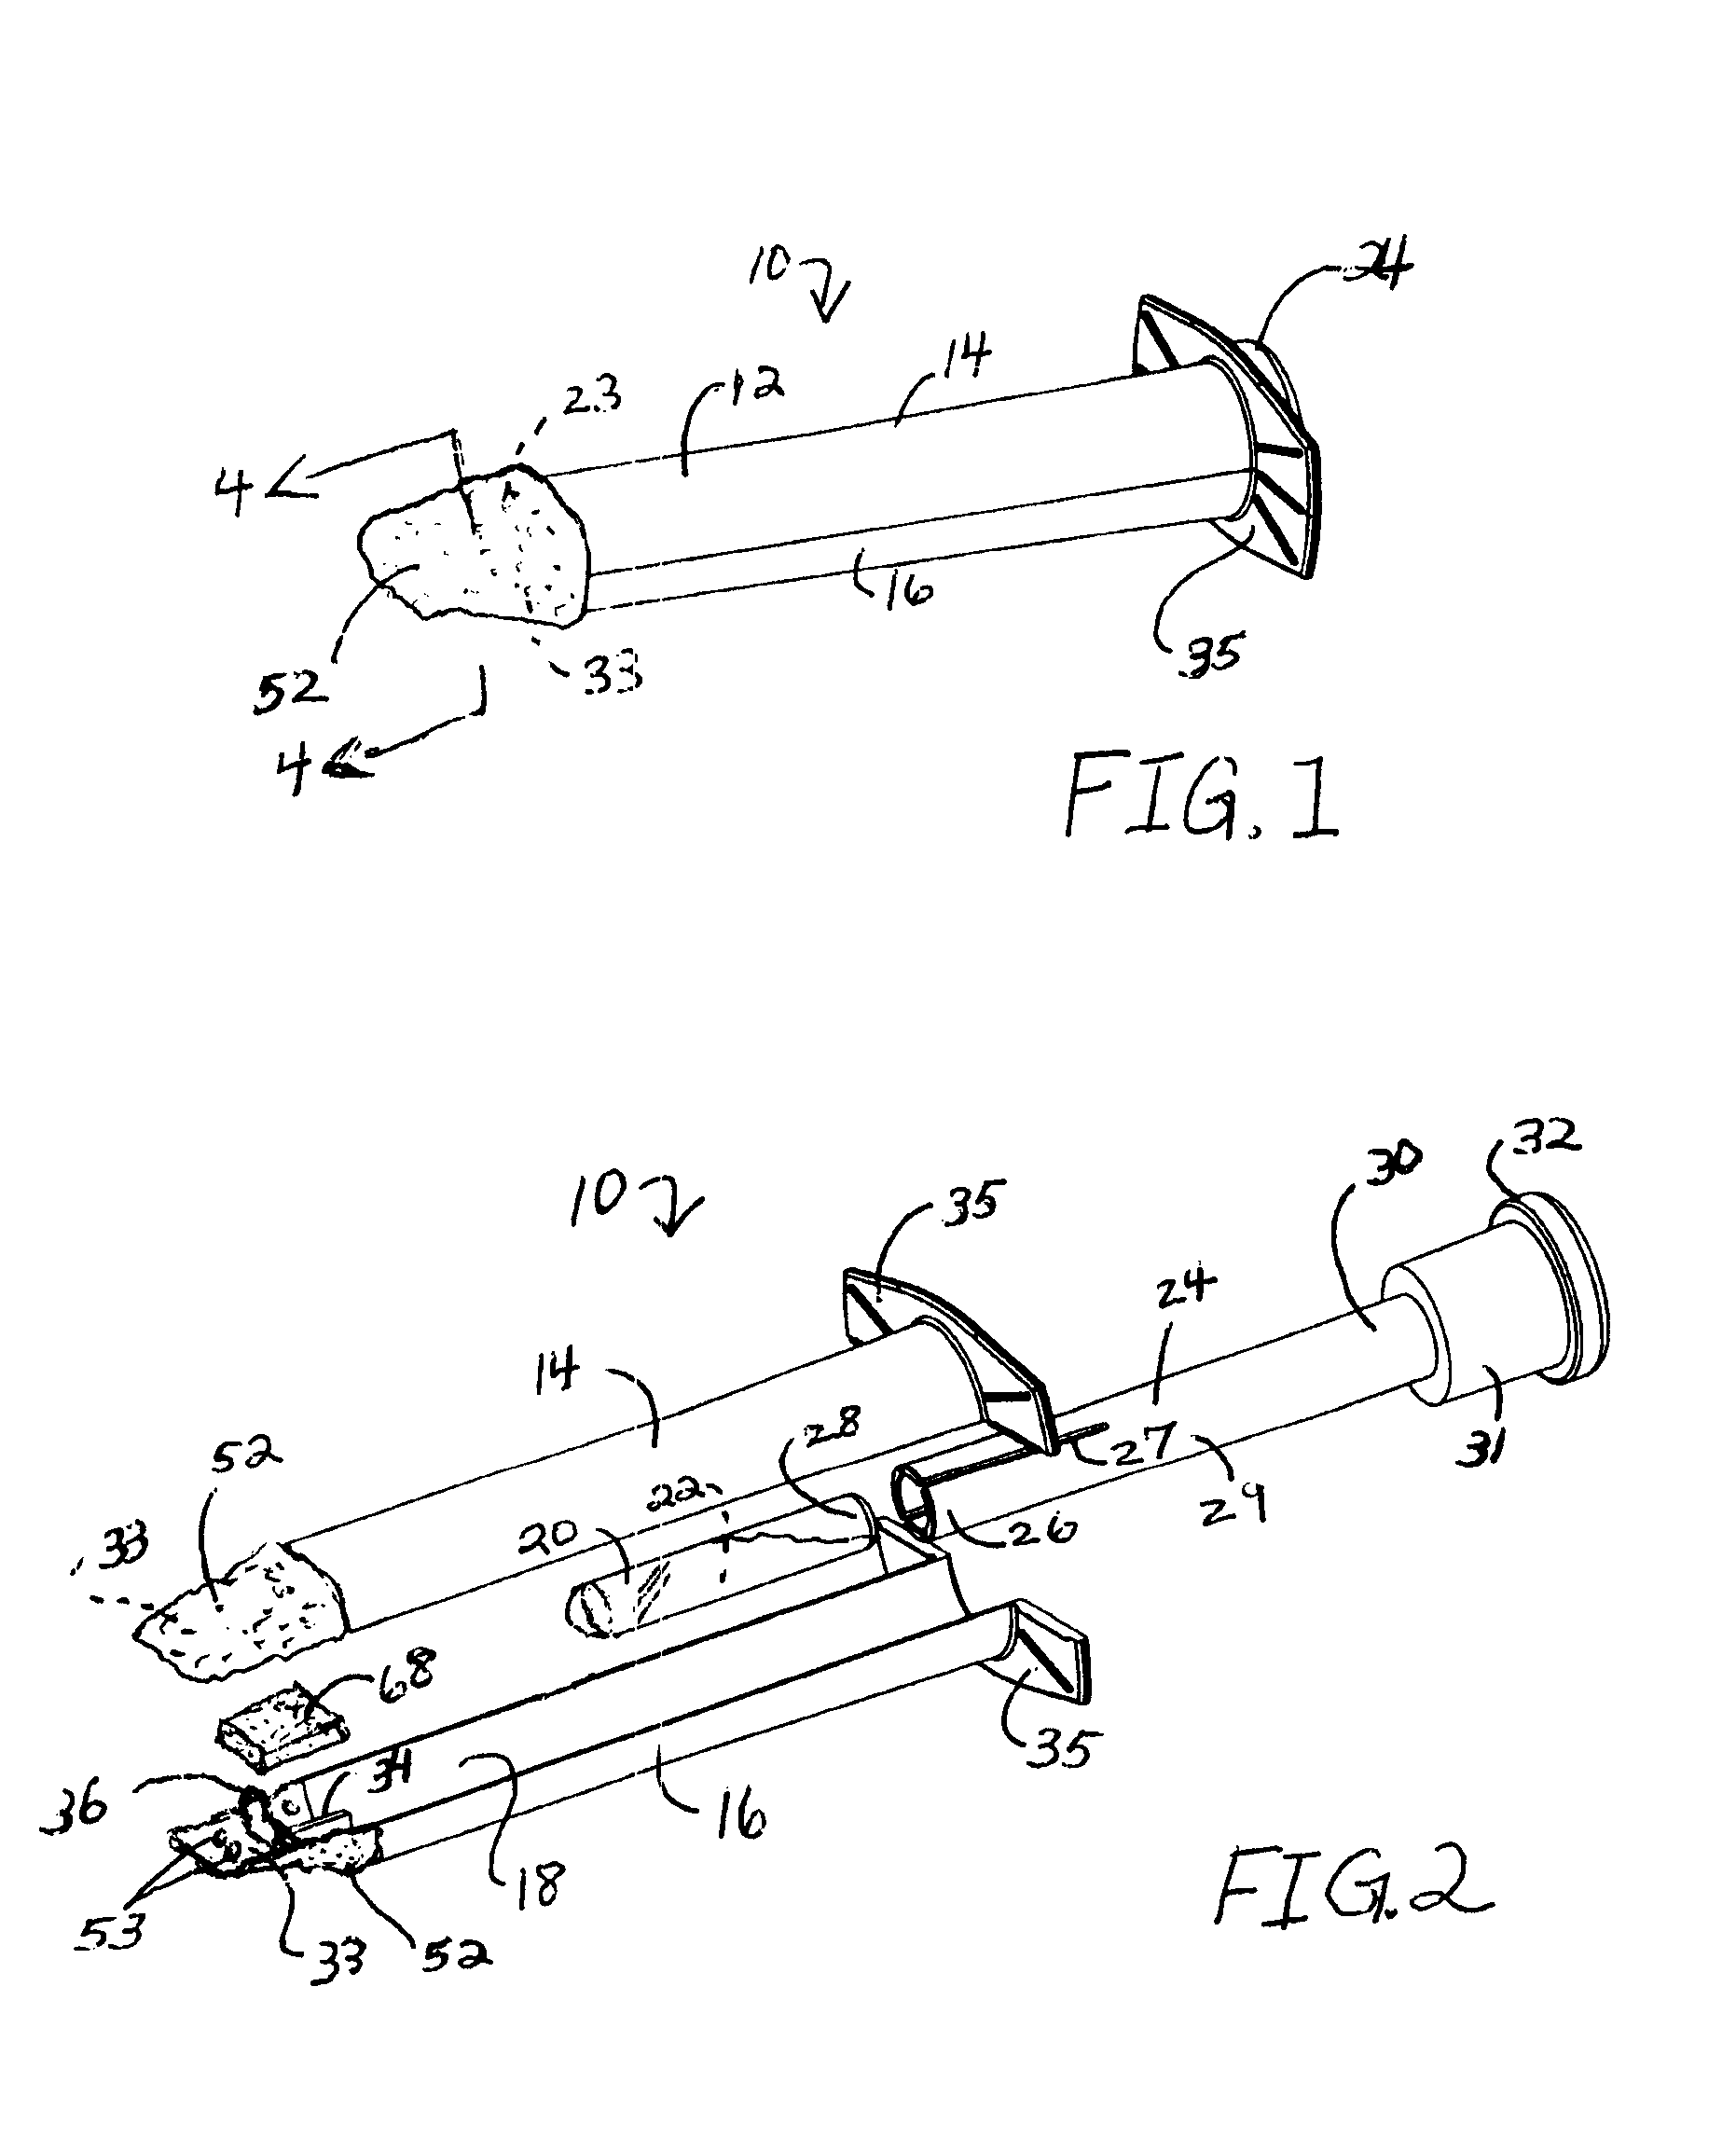 Applicator with flexible dispensing end